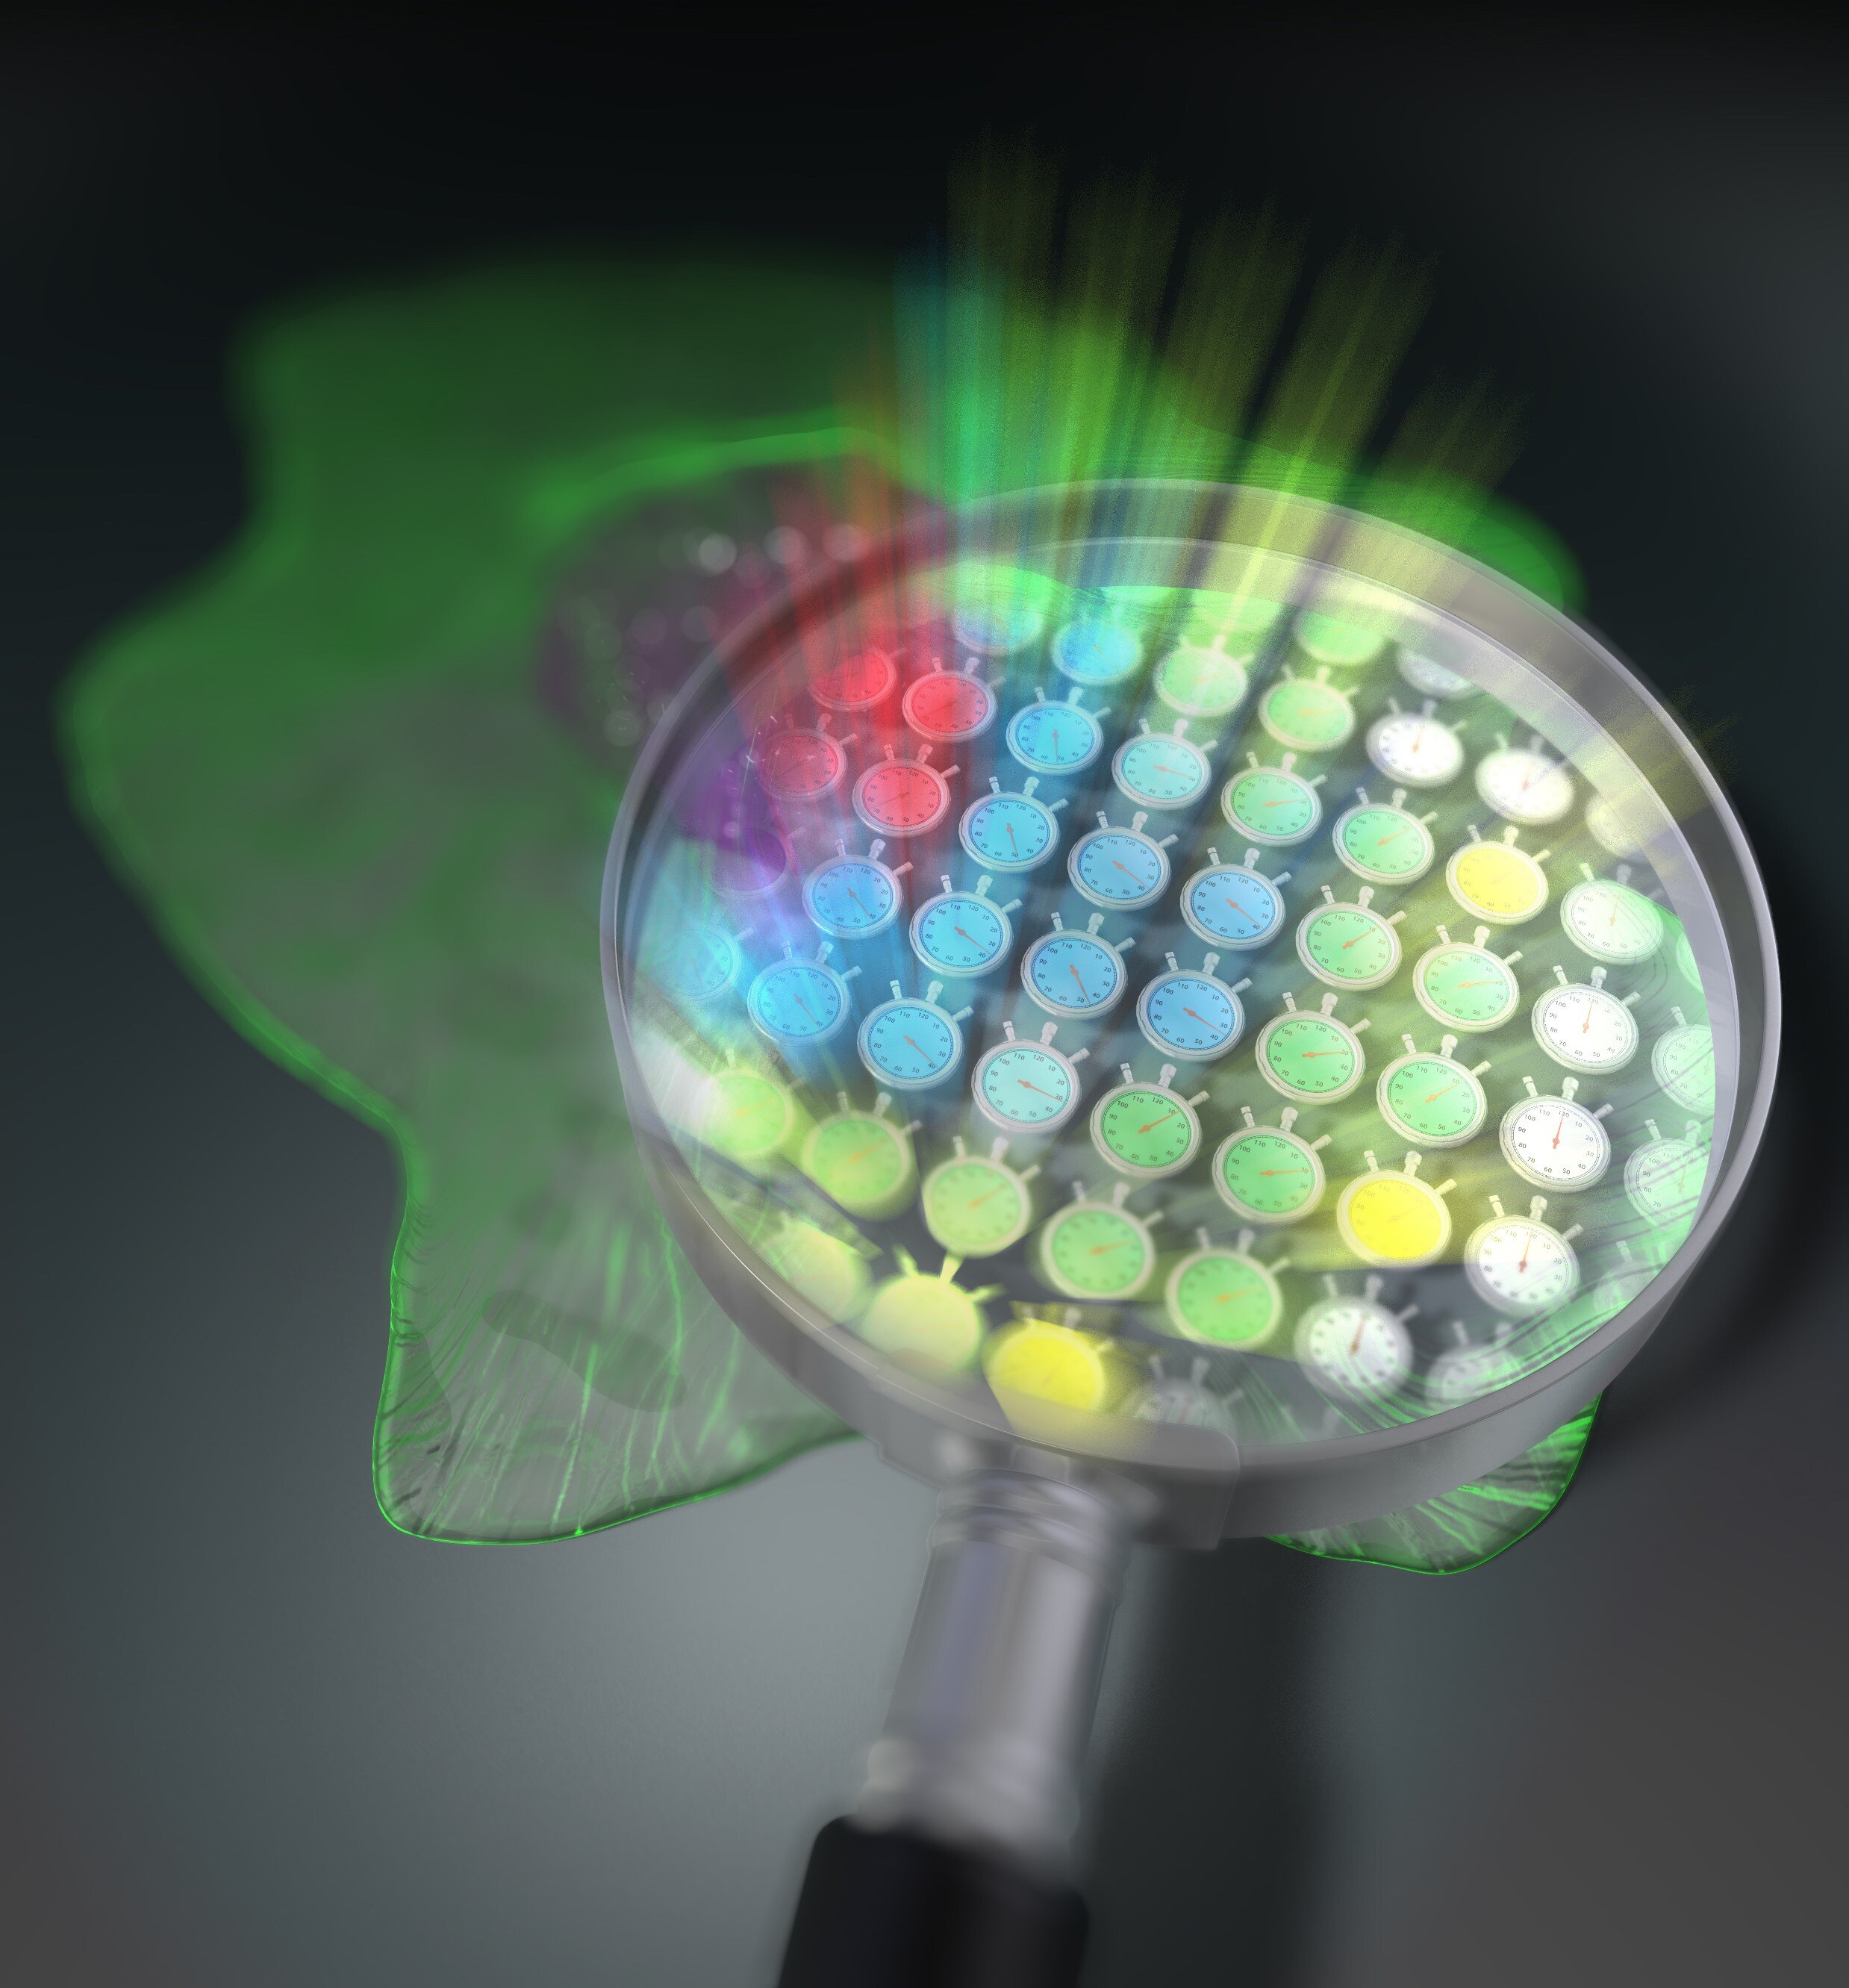 A new method for fluorescence microscopy